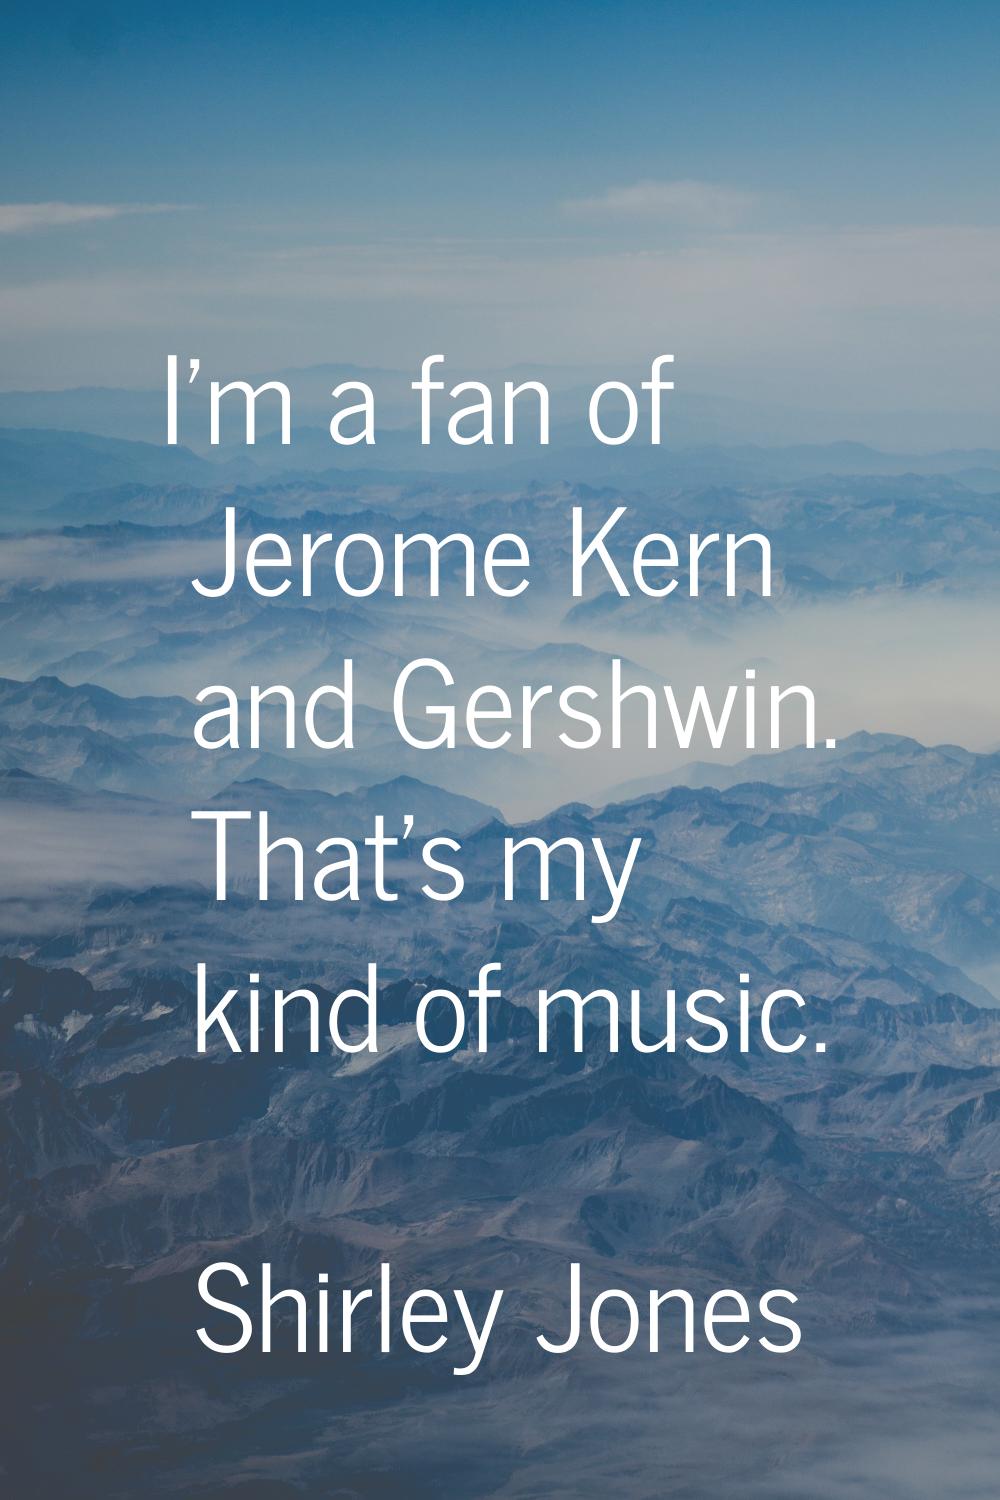 I'm a fan of Jerome Kern and Gershwin. That's my kind of music.